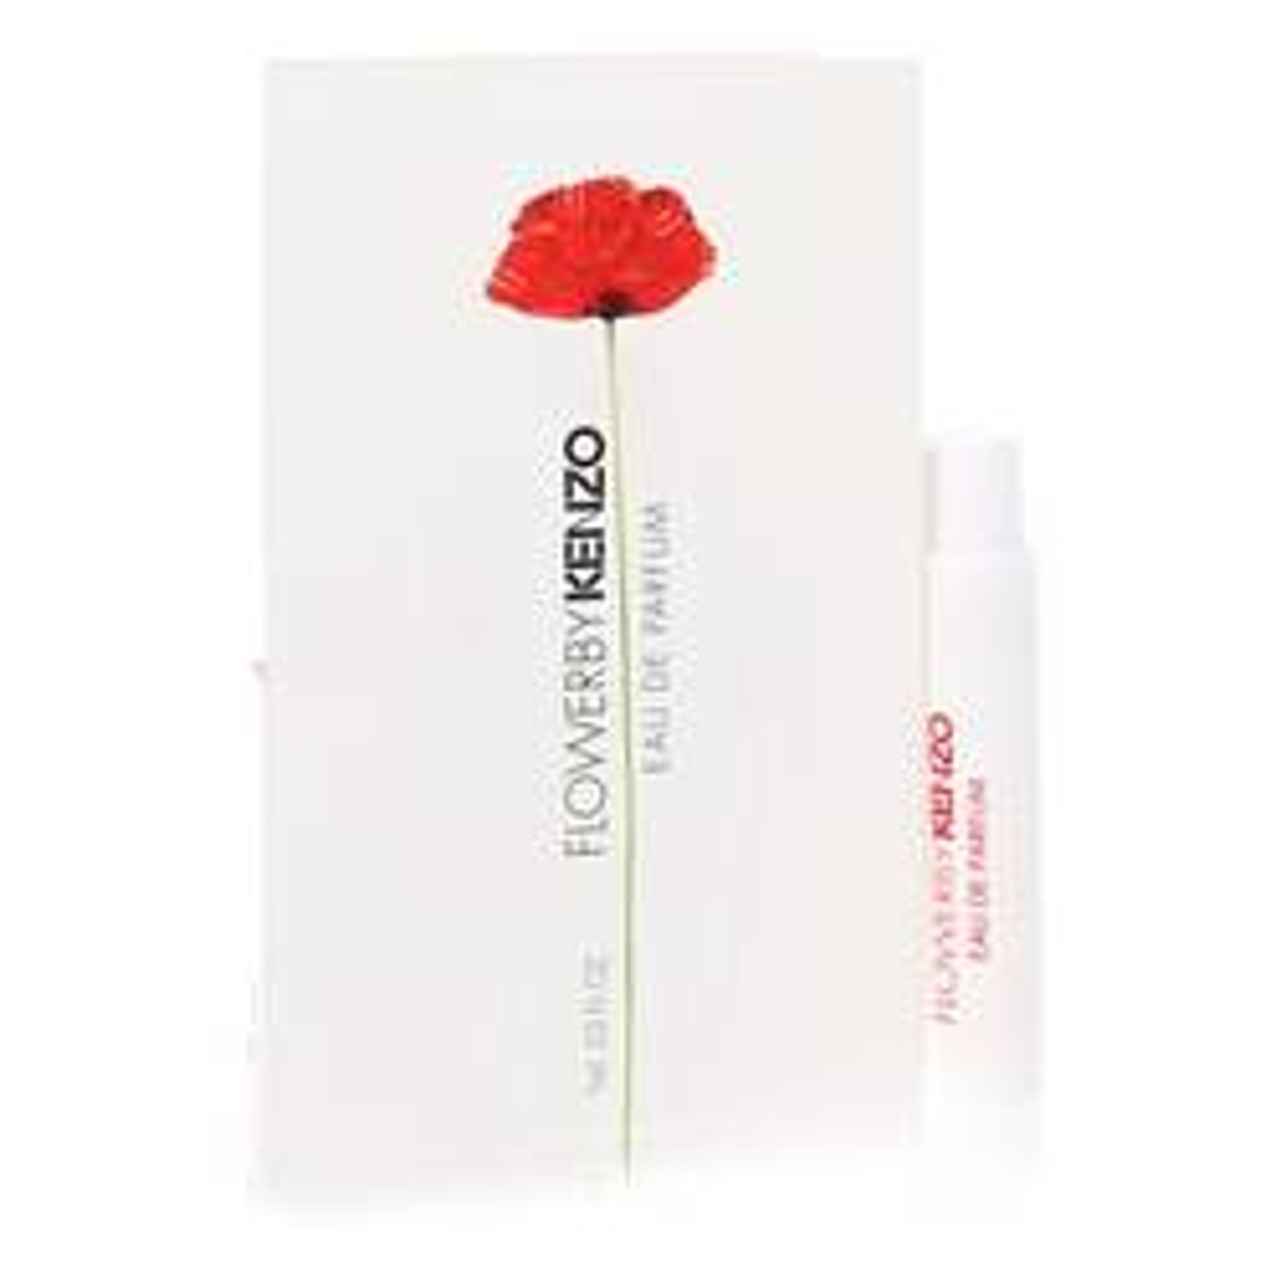 Kenzo Flower Perfume By Kenzo EDP Vial (sample) 0.03 oz for Women - [From 11.00 - Choose pk Qty ] - *Ships from Miami